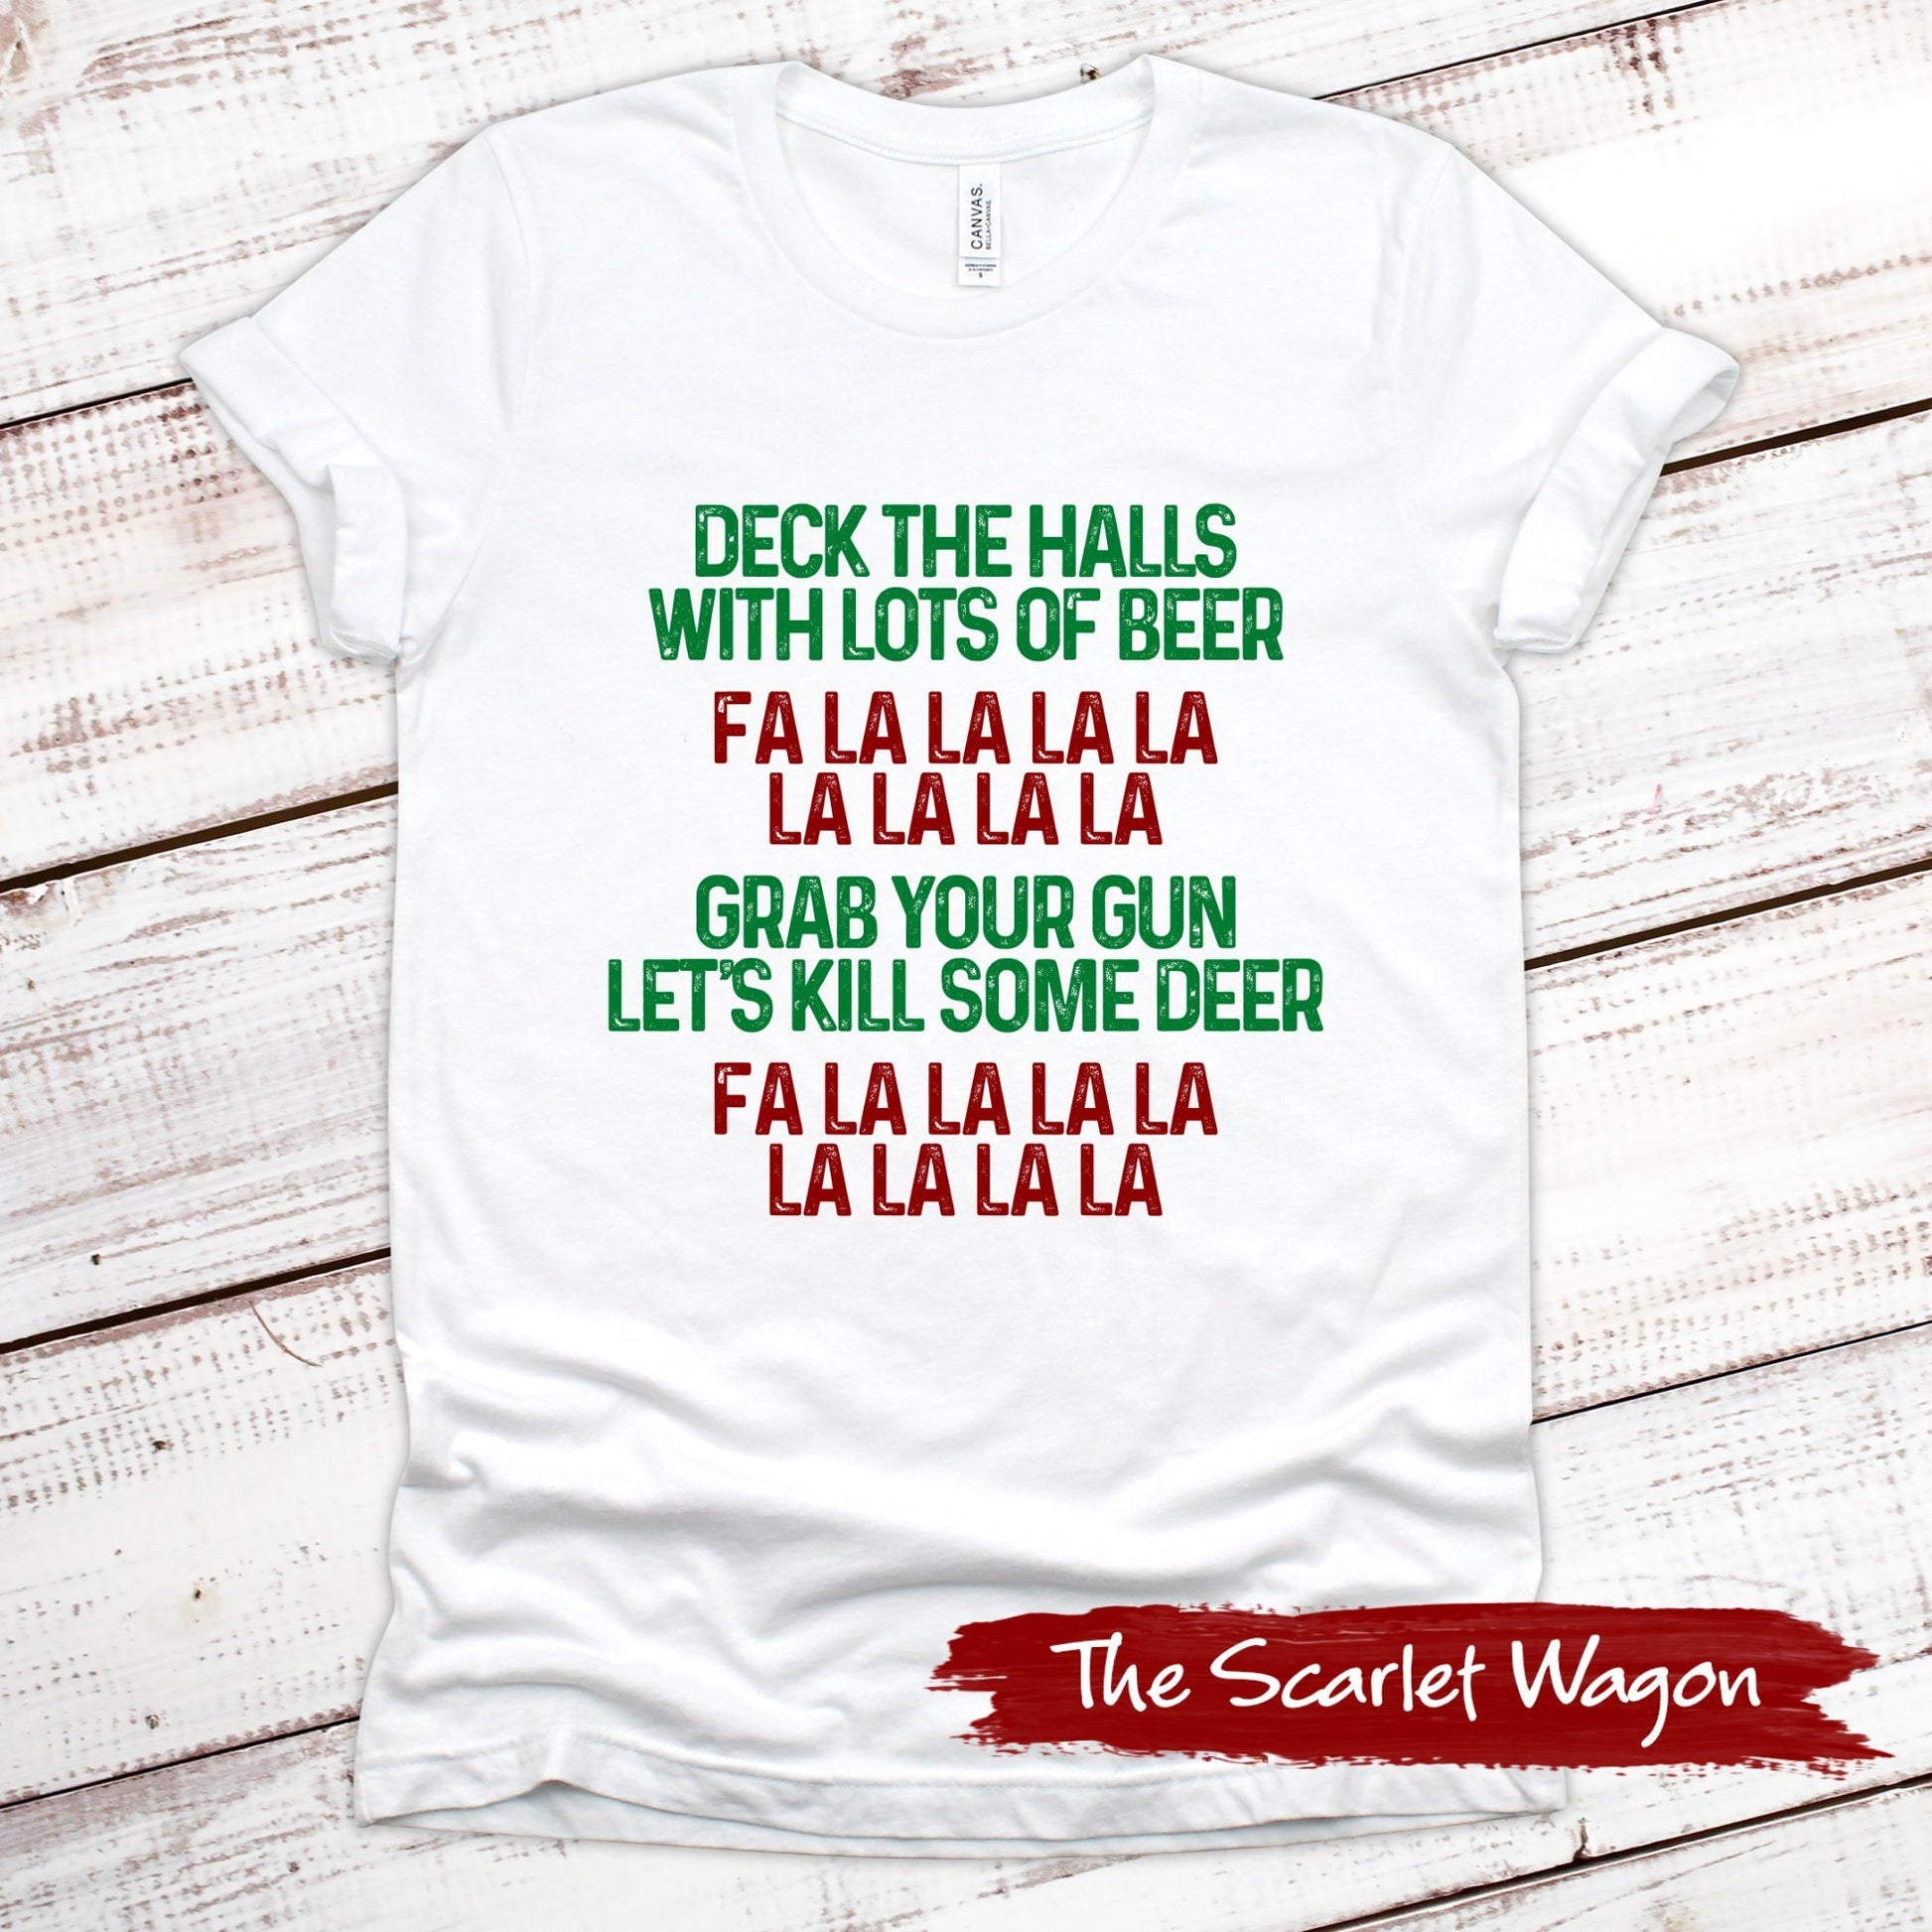 Deck the Halls with Lots of Beer Christmas Shirt Scarlet Wagon White XS 